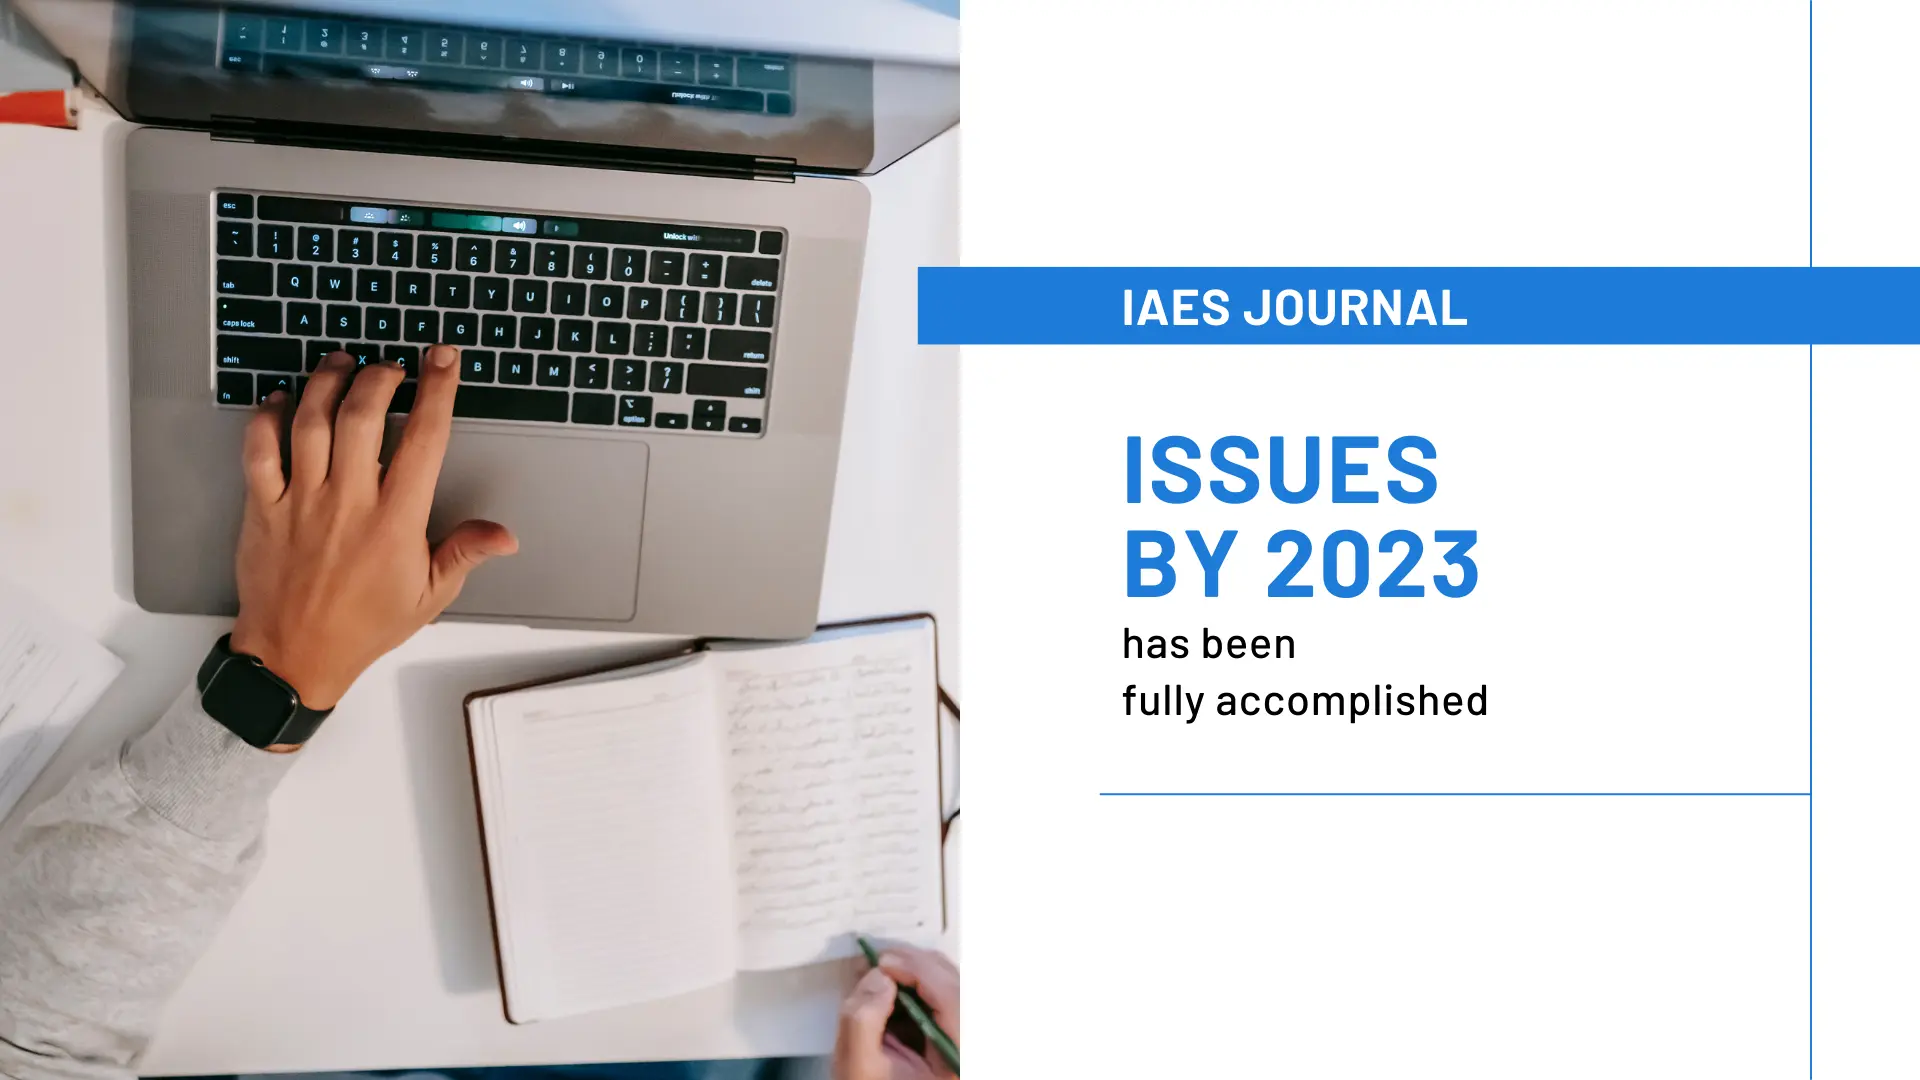 IAES journal issues by 2023 have been fully accomplished